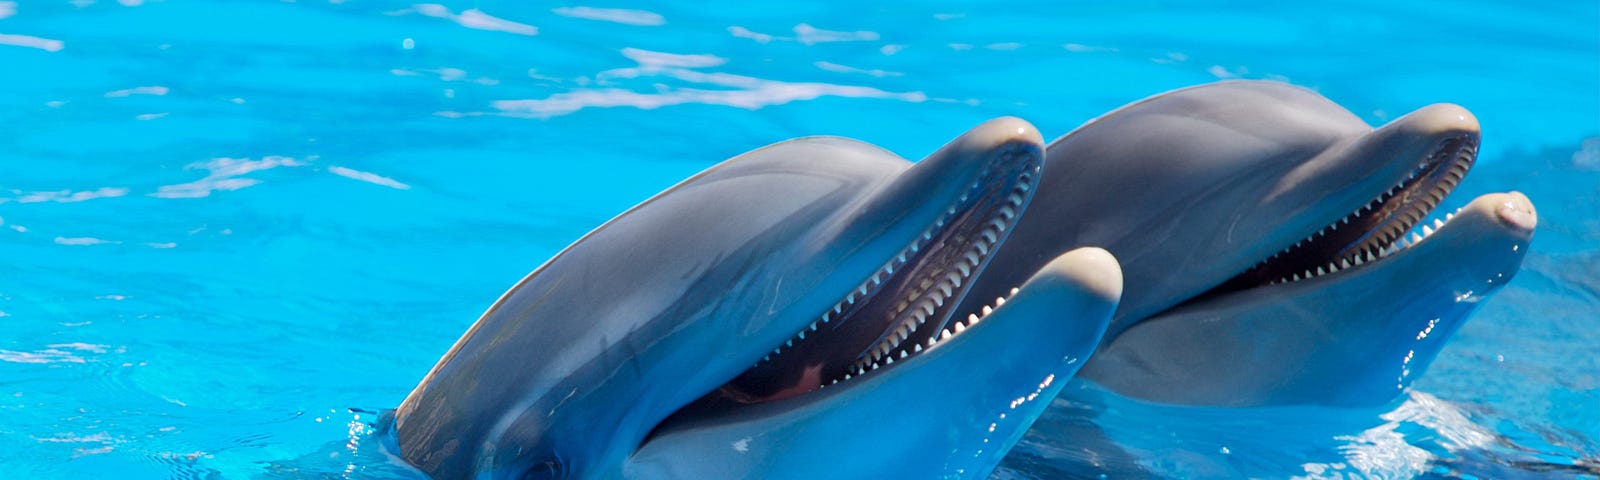 Two dolphins break the surface of bright, blue water.